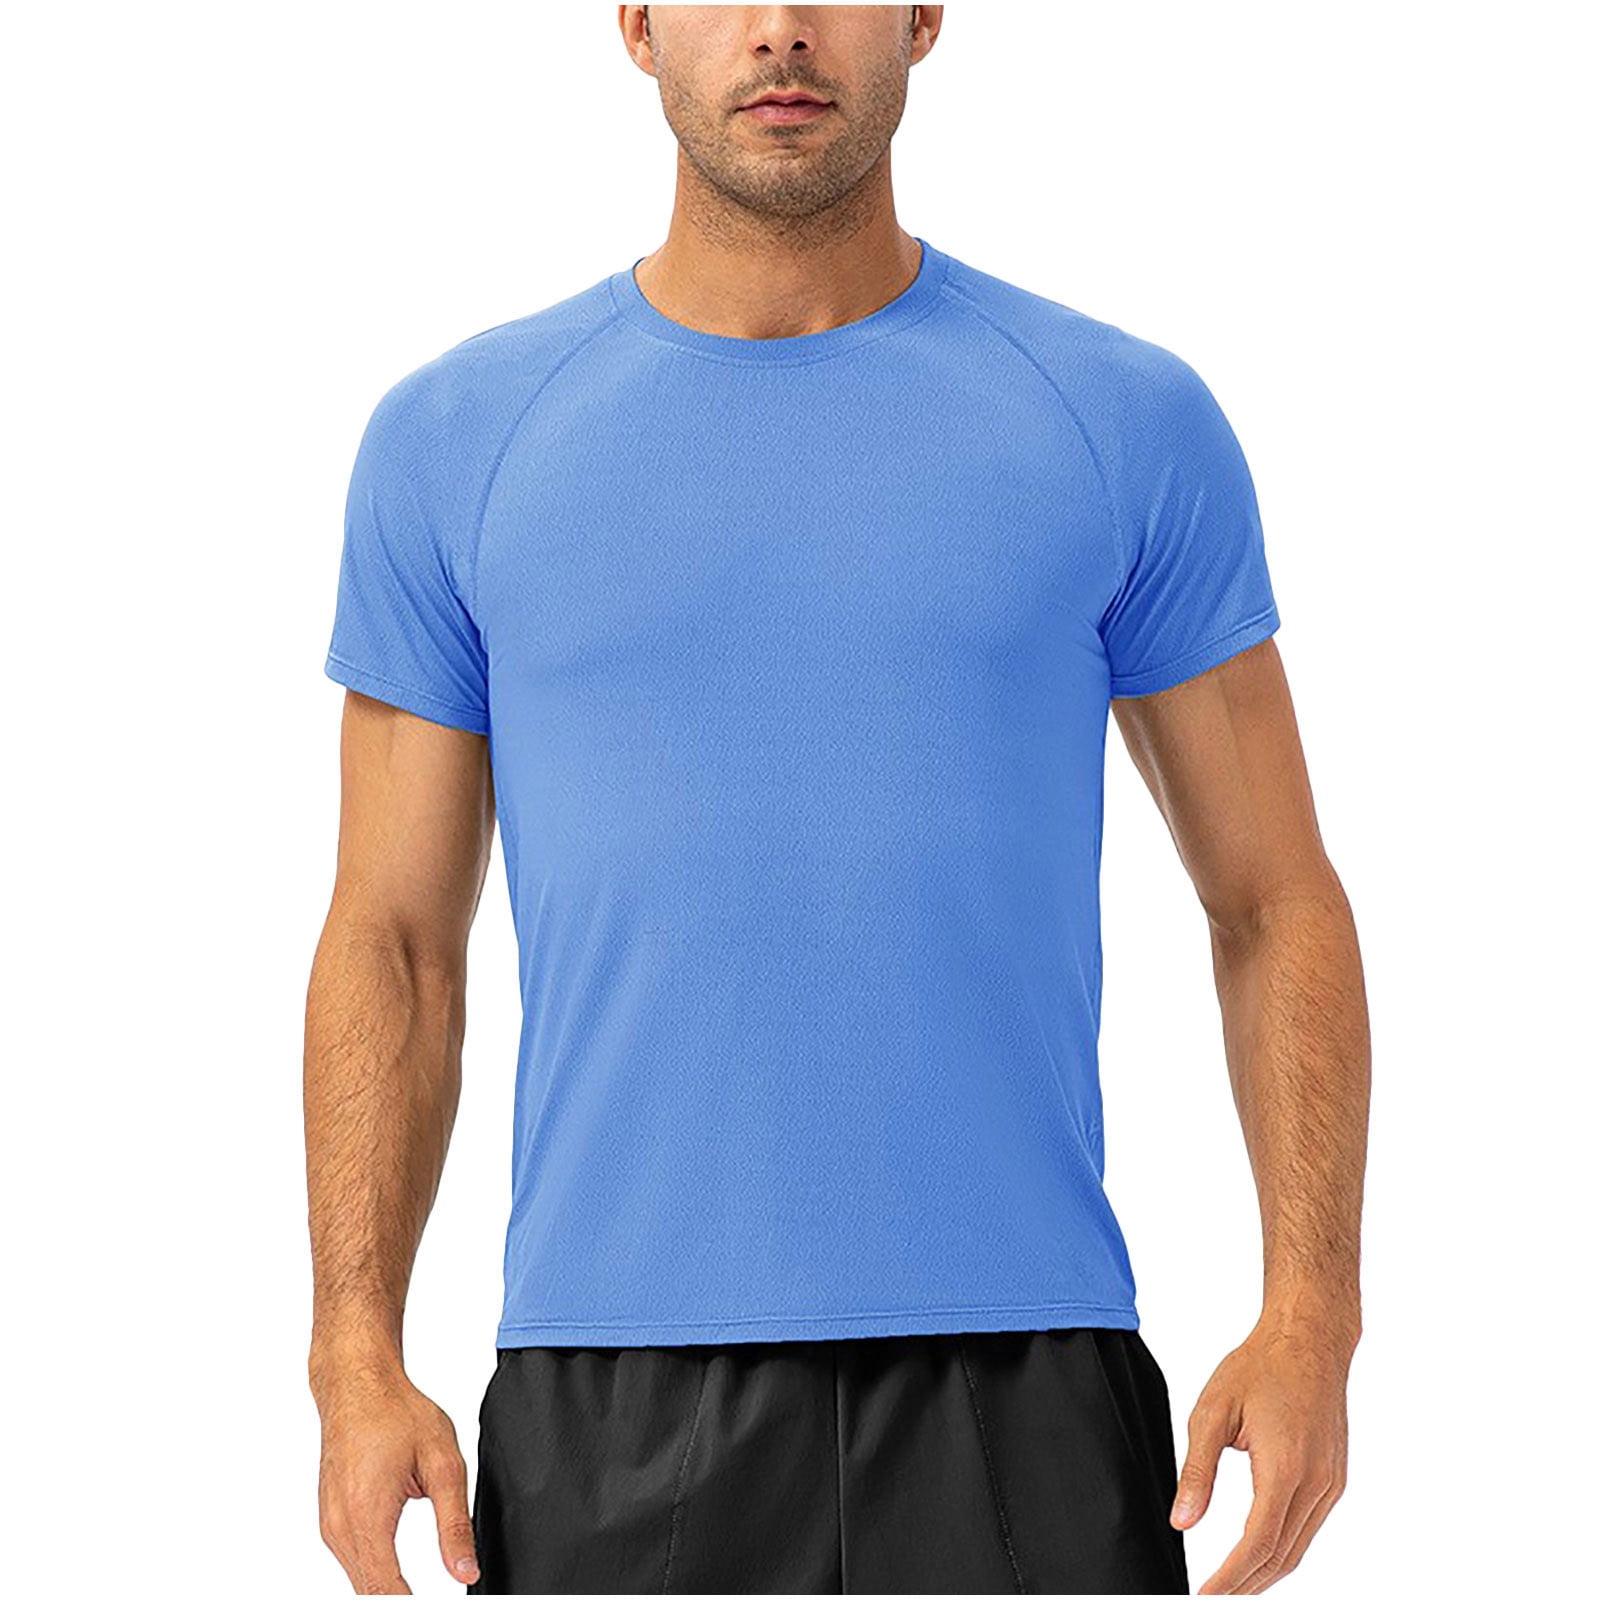 2023 Mens Gym Workout Slim Fit Short Sleeve T-Shirt Athletic Shirts Running  Fitness Casual Quick Dry Top Tees 